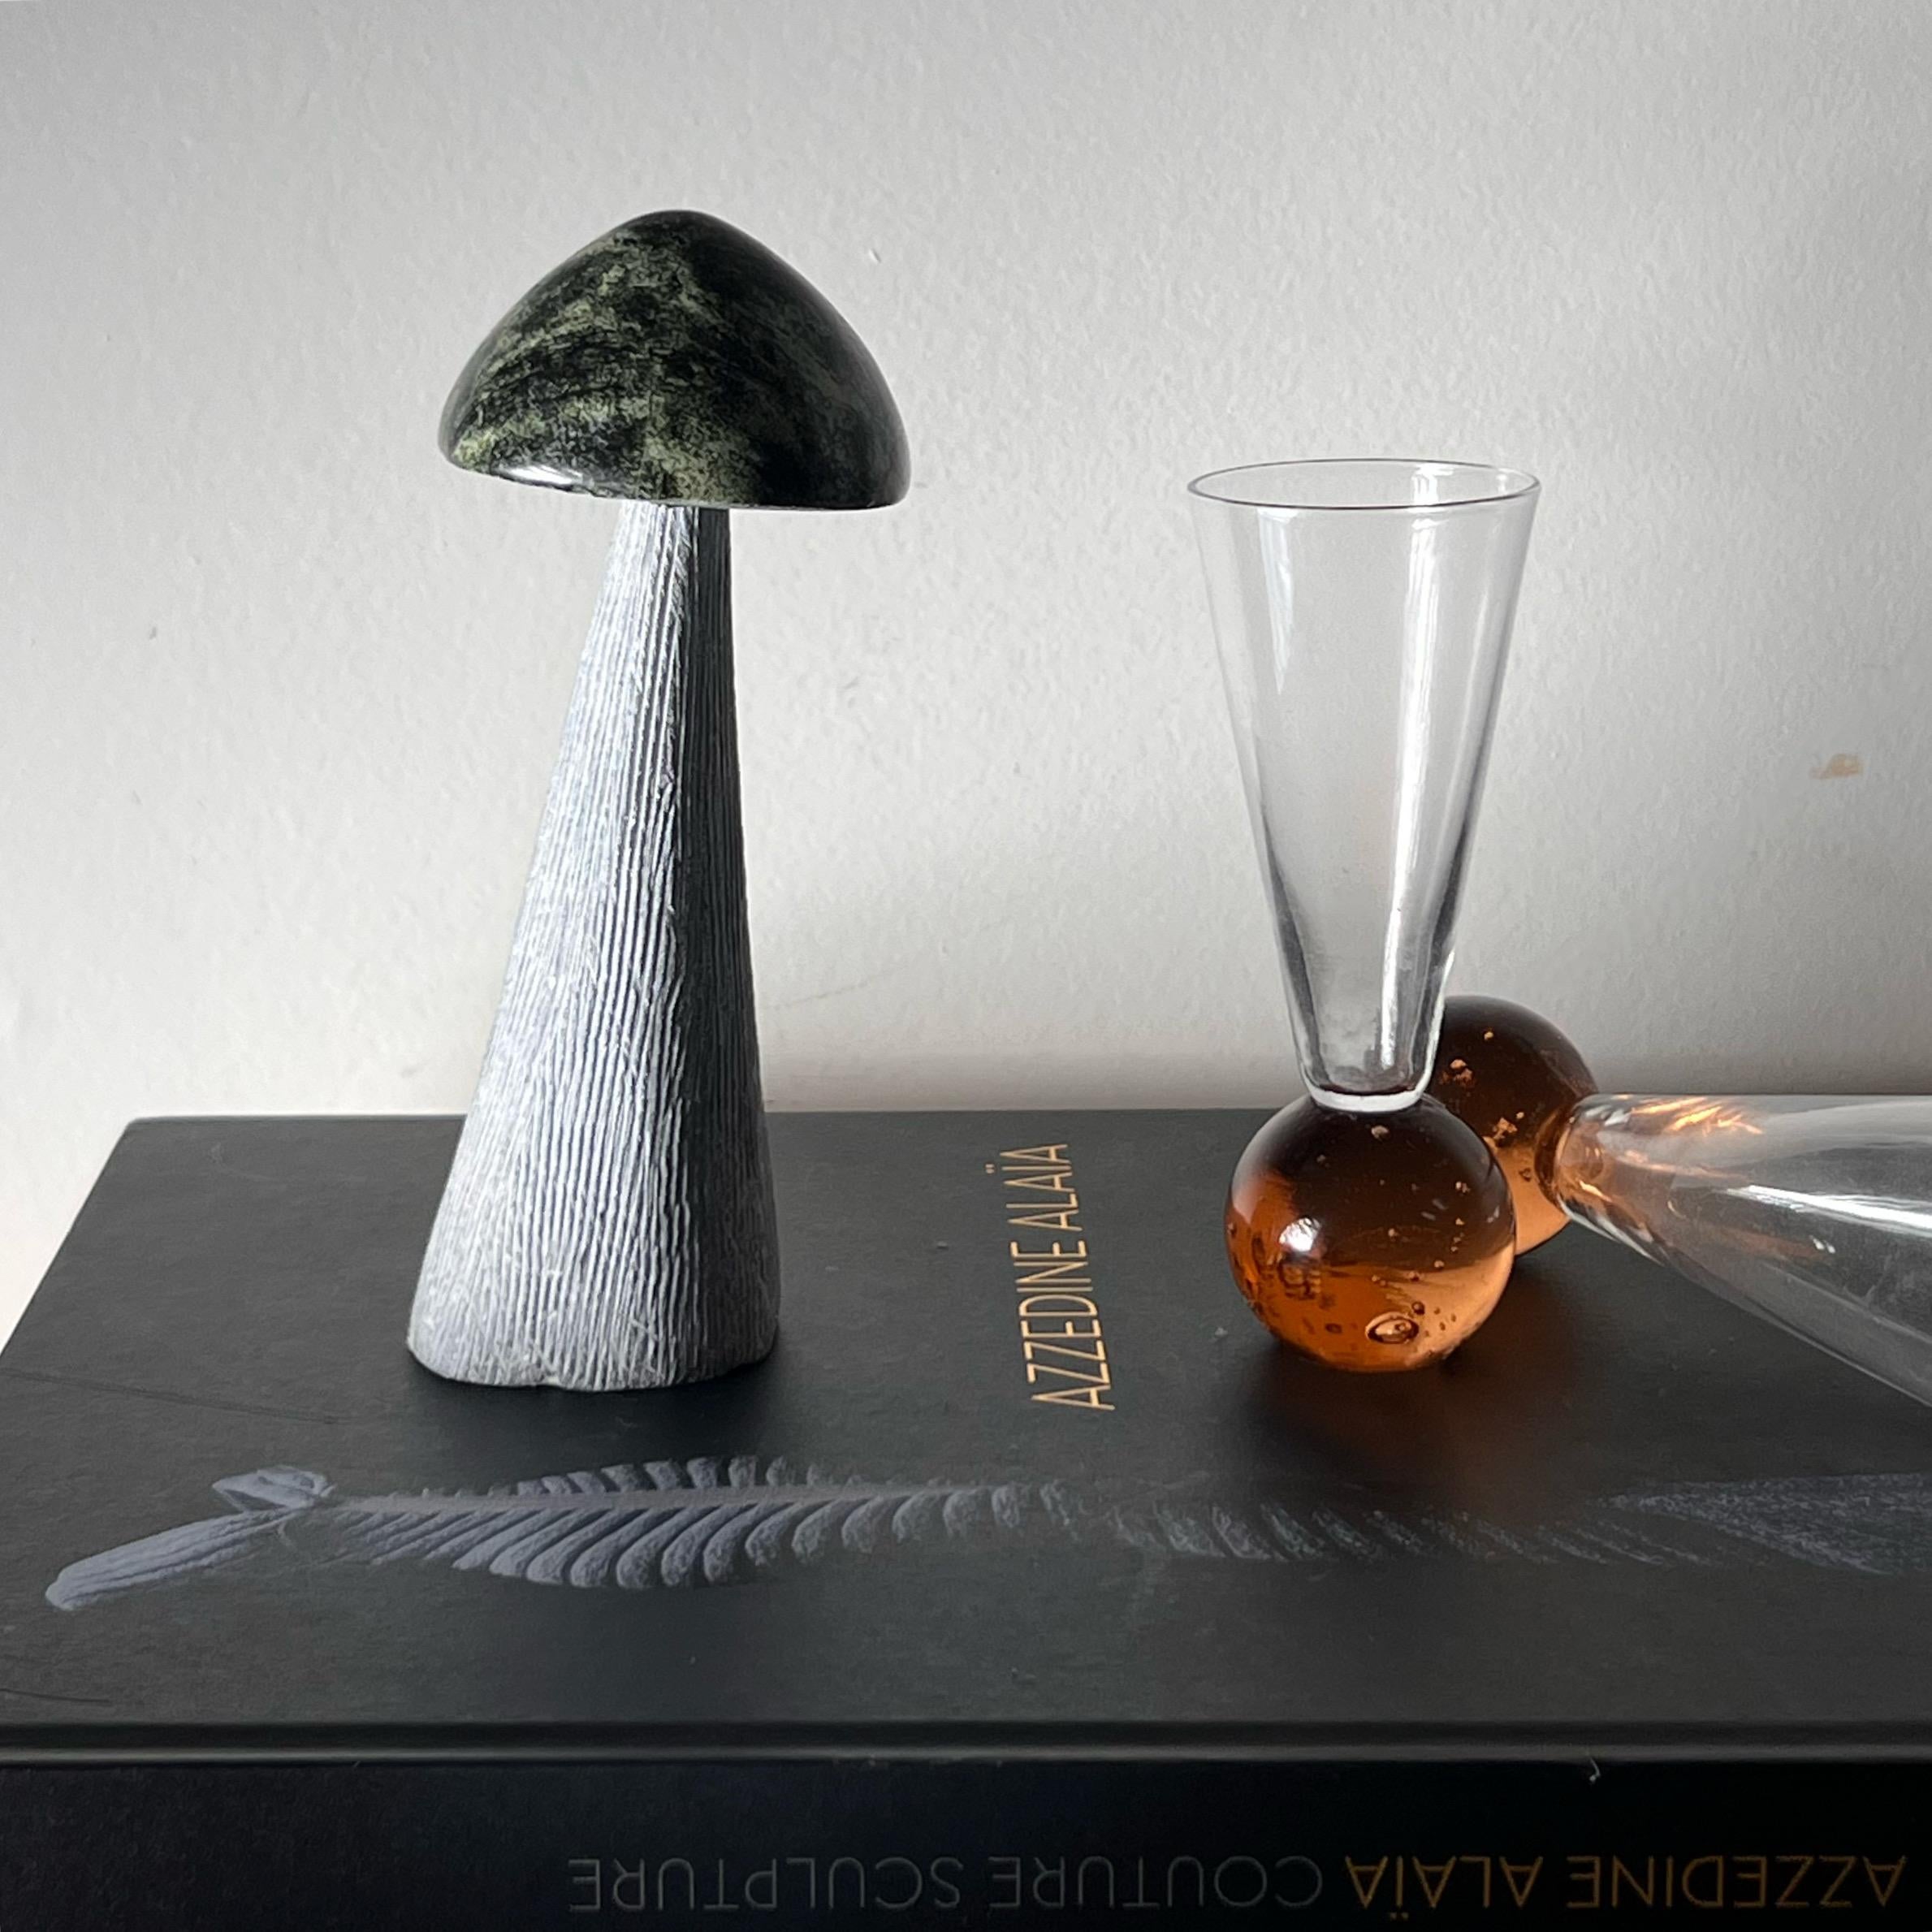 A vintage marble and ceramic hand-carved mushroom sculpture / objet d’art, circa 1970s. Ceramic base is dove gray, whilst marble cap is pine green. A rare and unique little sculpture. 